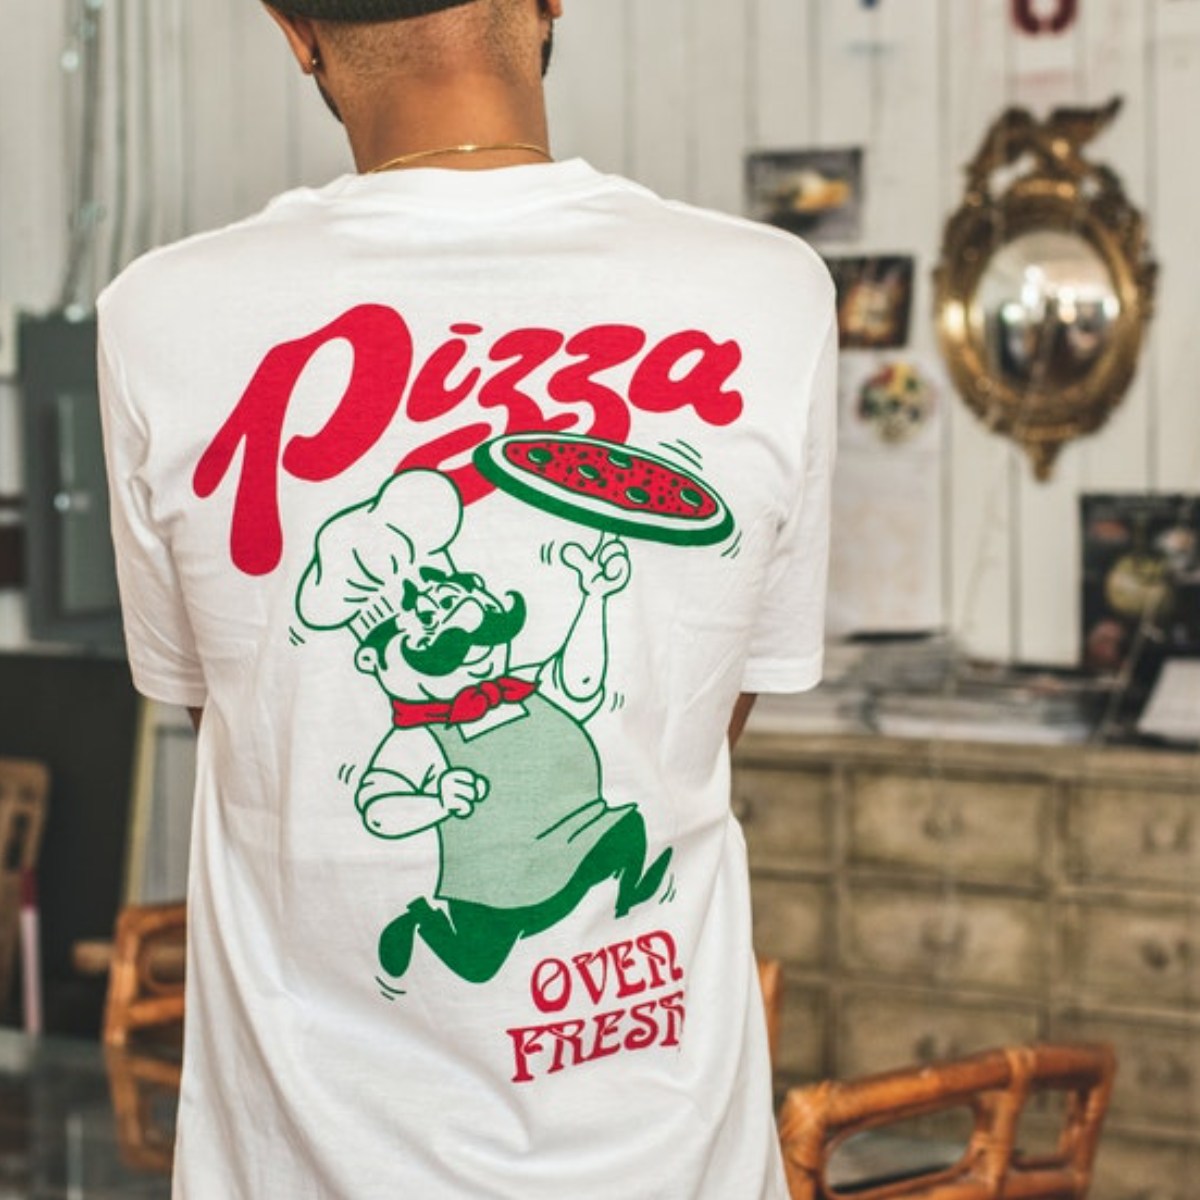 A person wearing a custom graphic shirt made for a pizza parlor